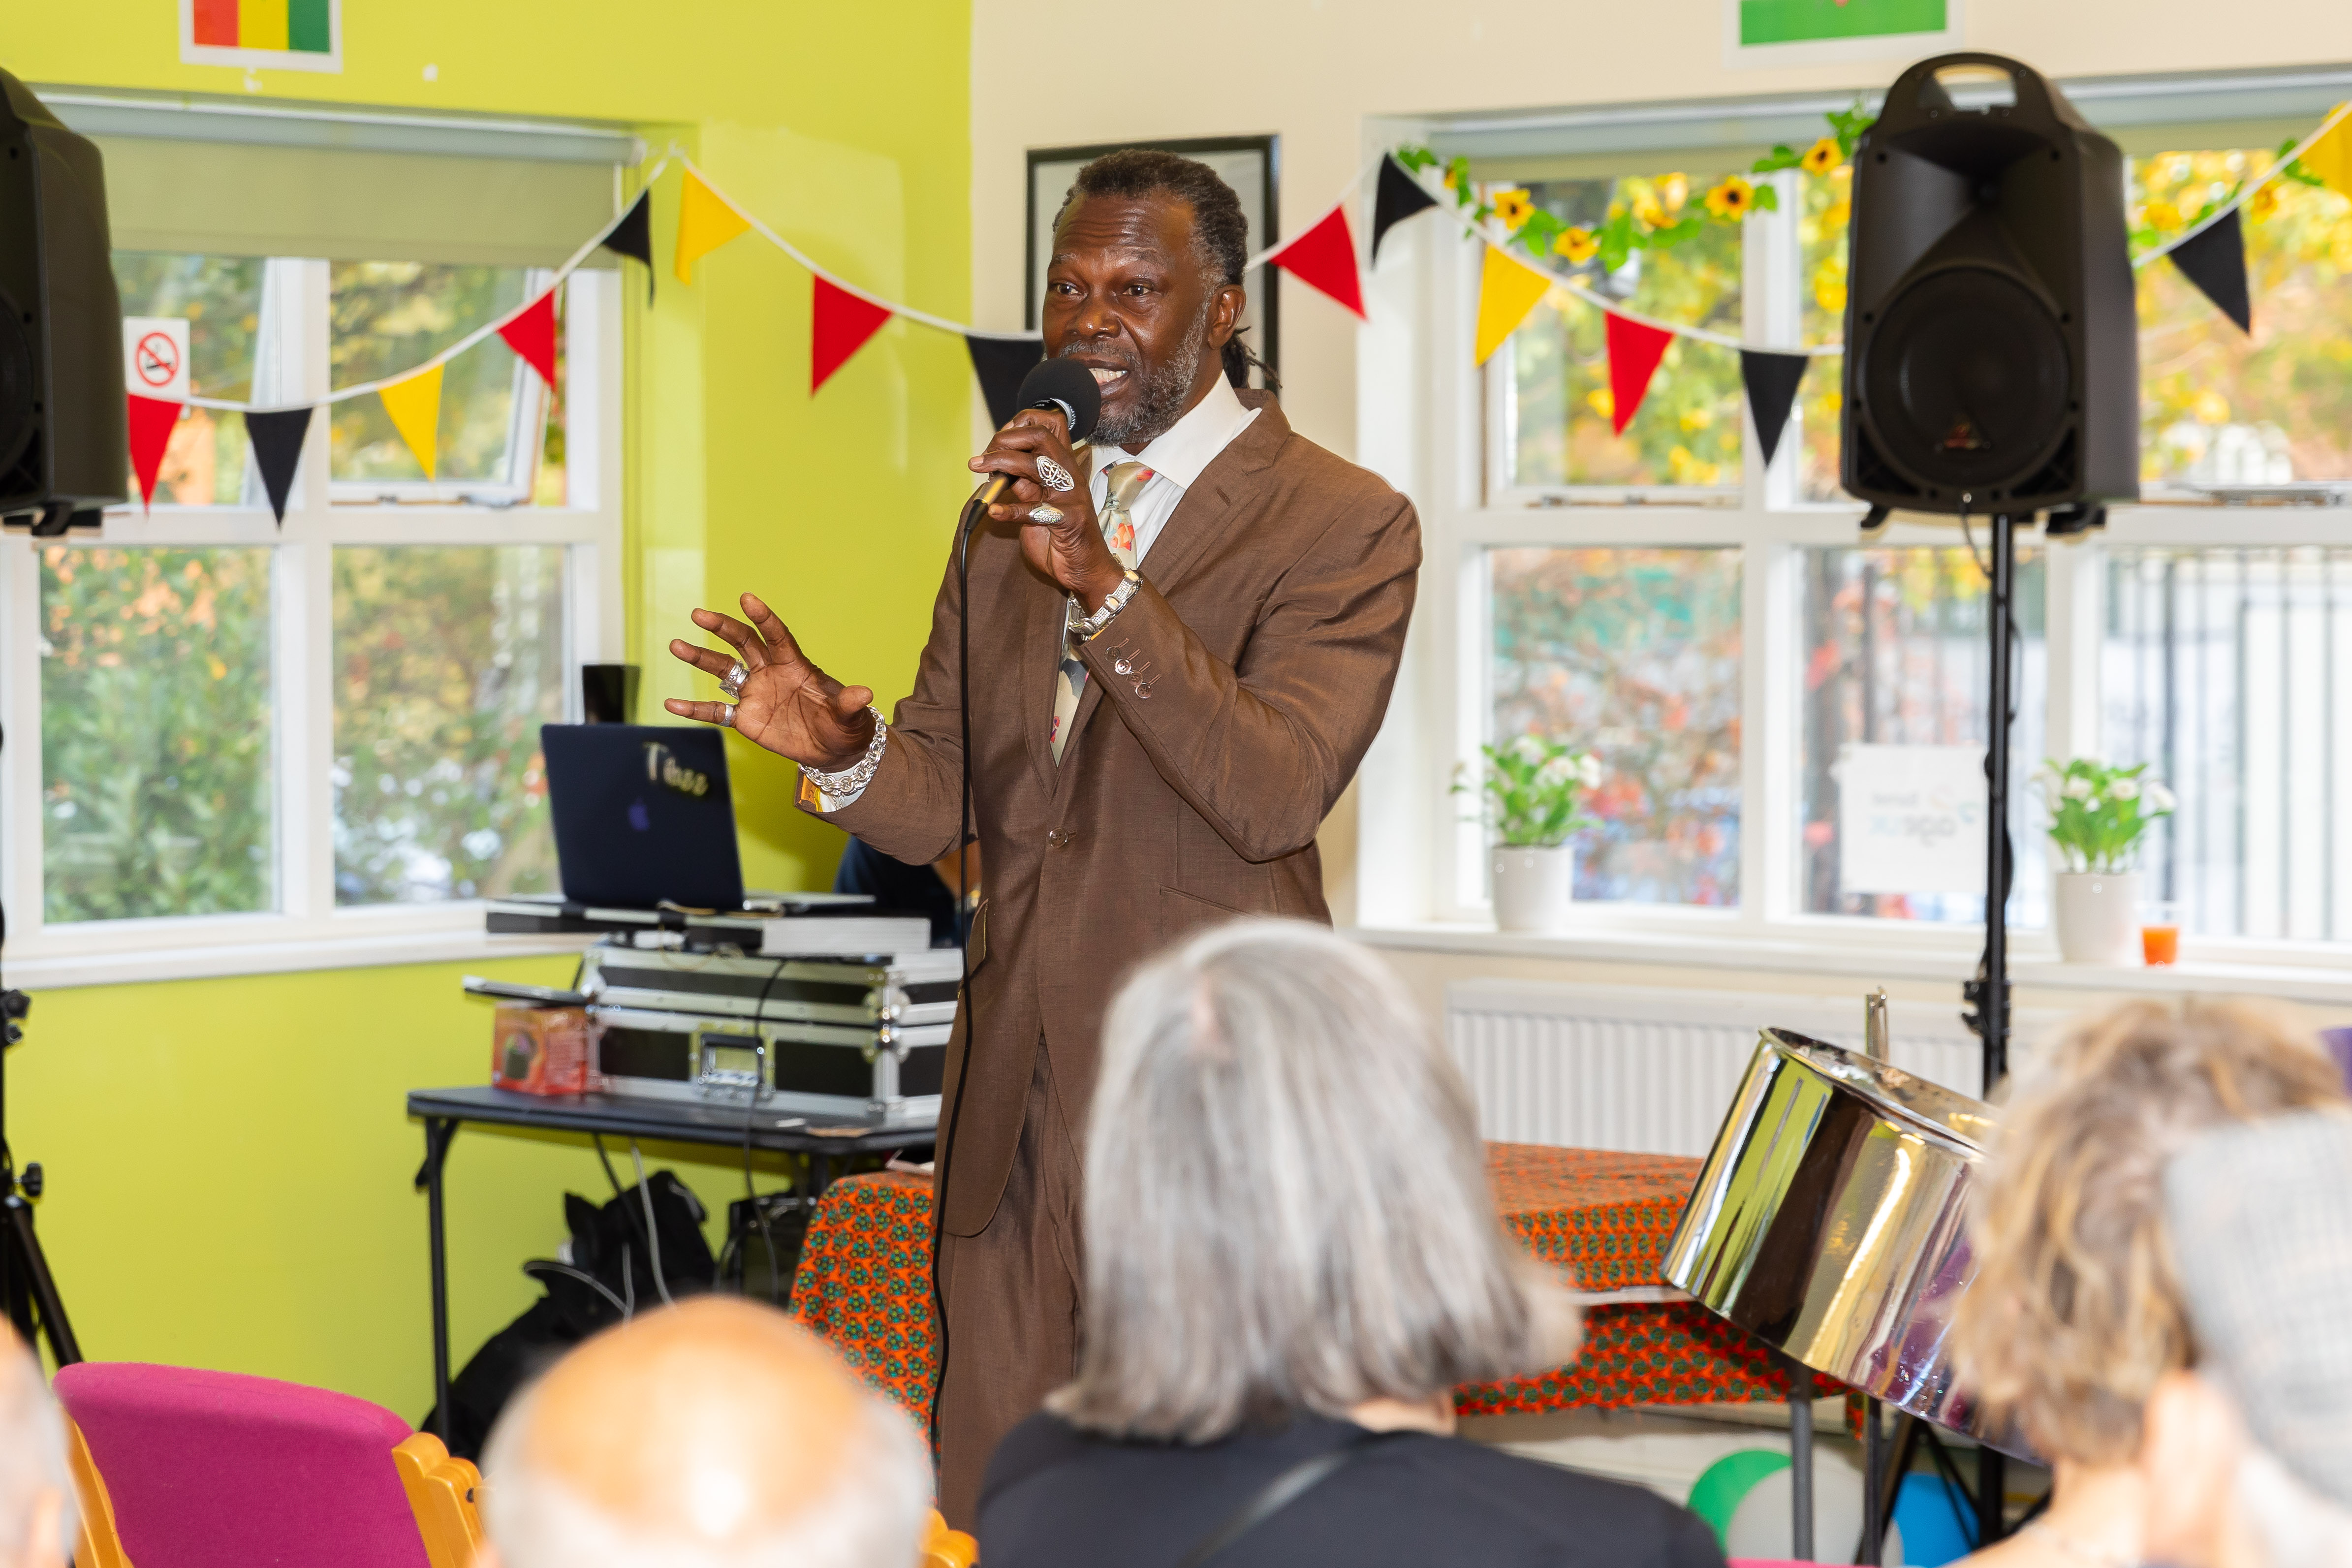 Levi giving his talk for Black History Month at Age UK Barnet